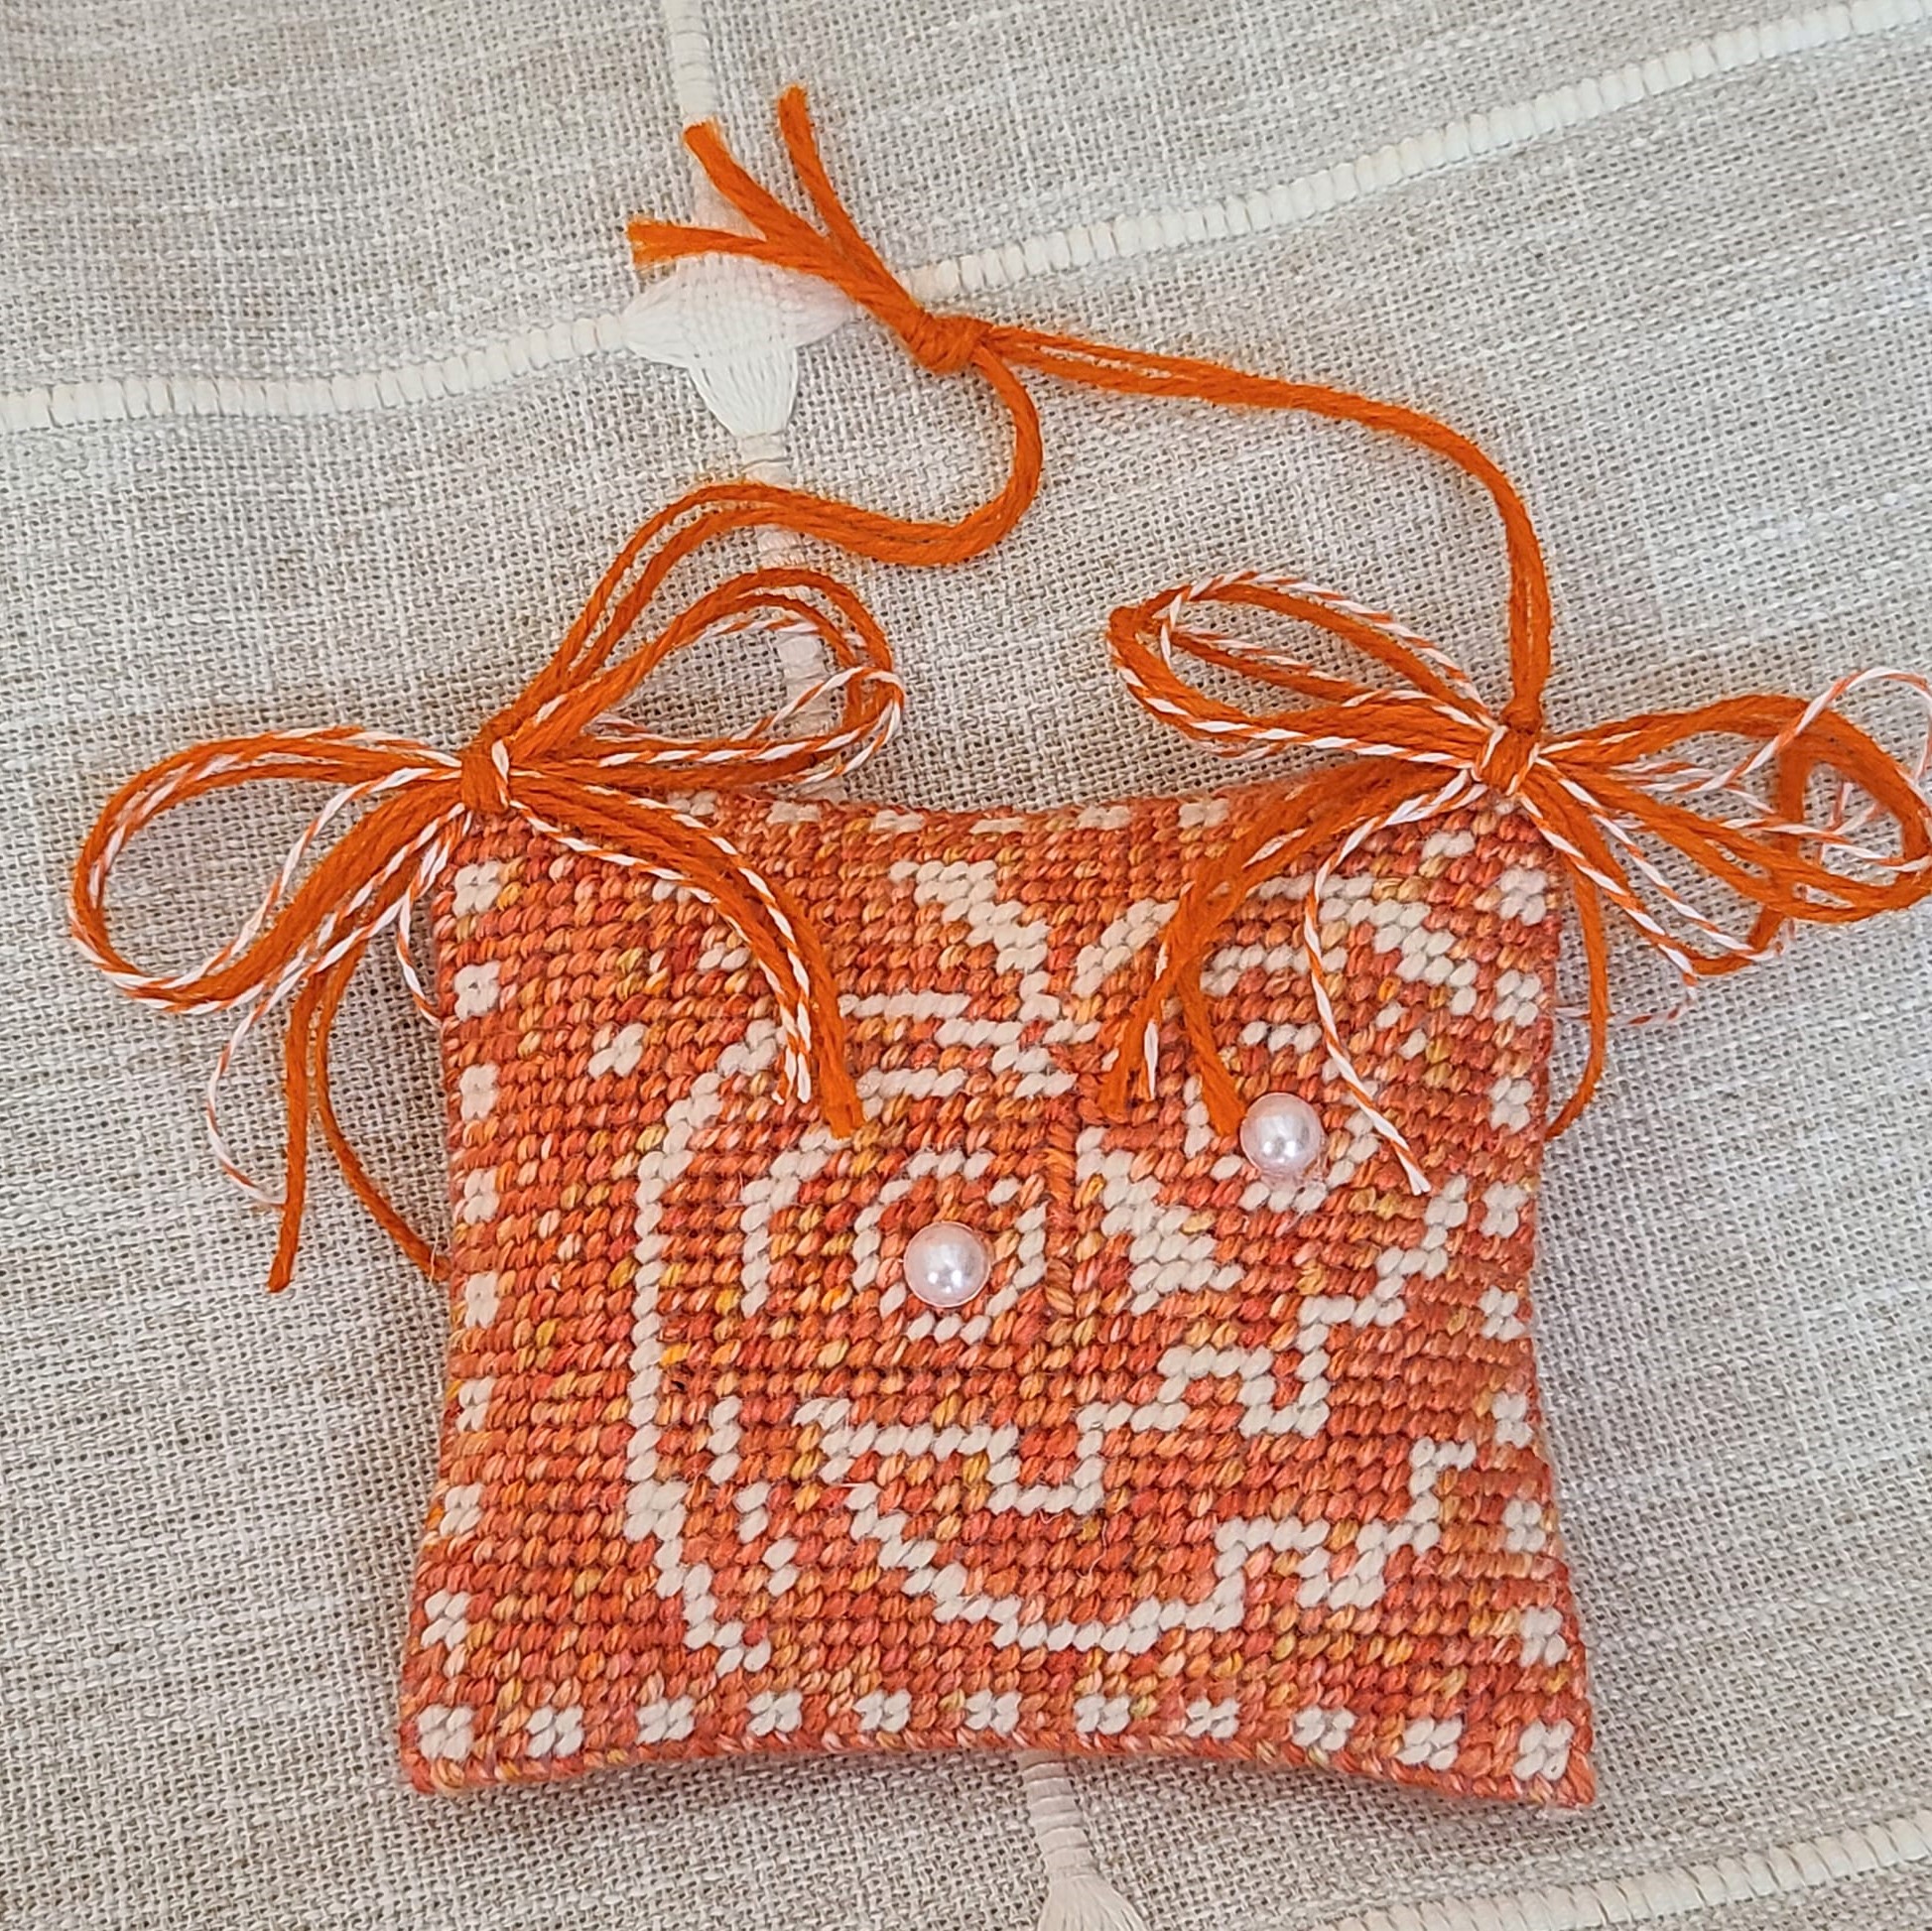 Halloweeen needlepoint pumpkin with pearl eyes ornament - Click Image to Close